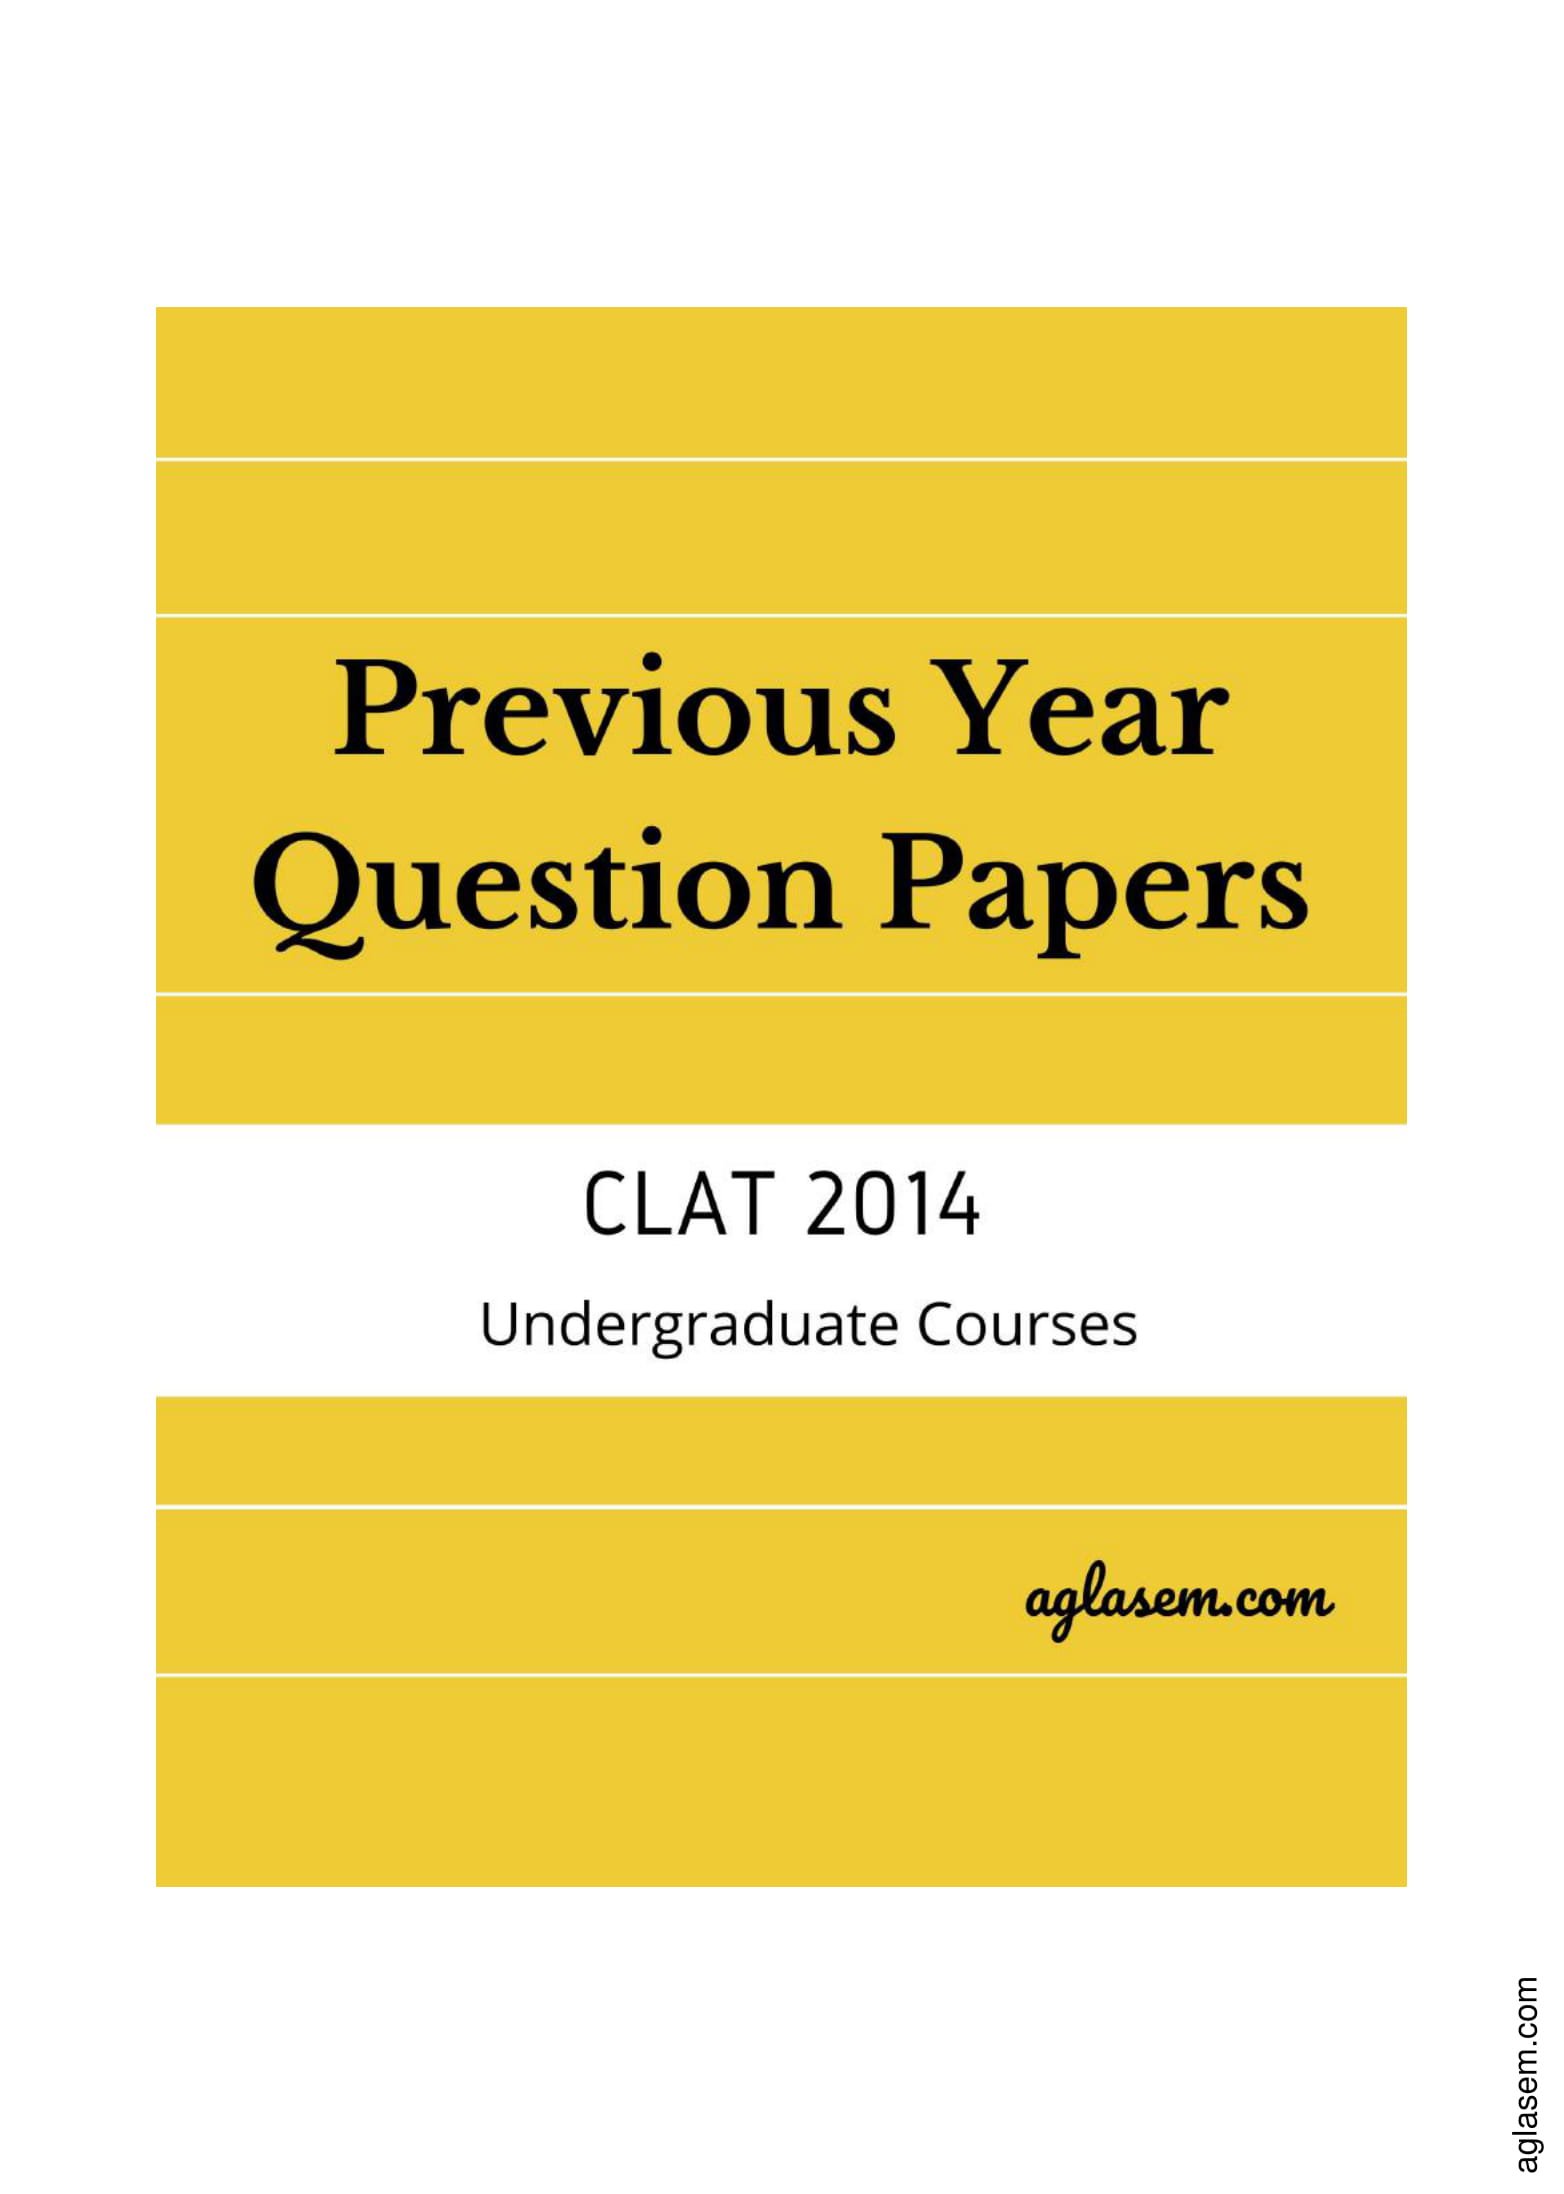 CLAT 2014 Question Paper - Page 1